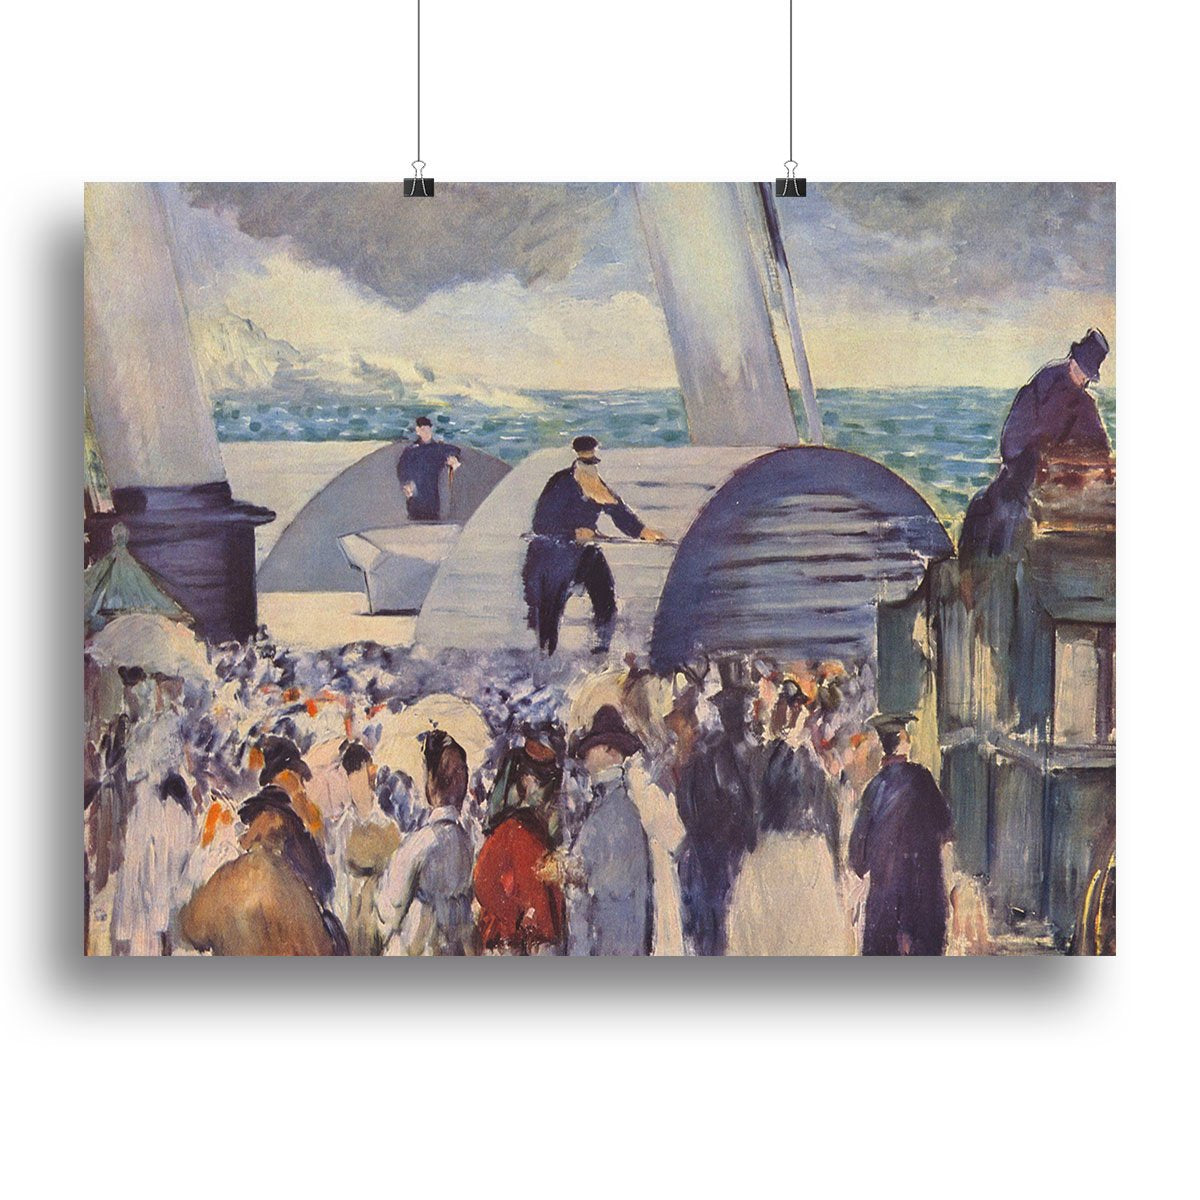 Embarkation of the Folkestone by Manet Canvas Print or Poster